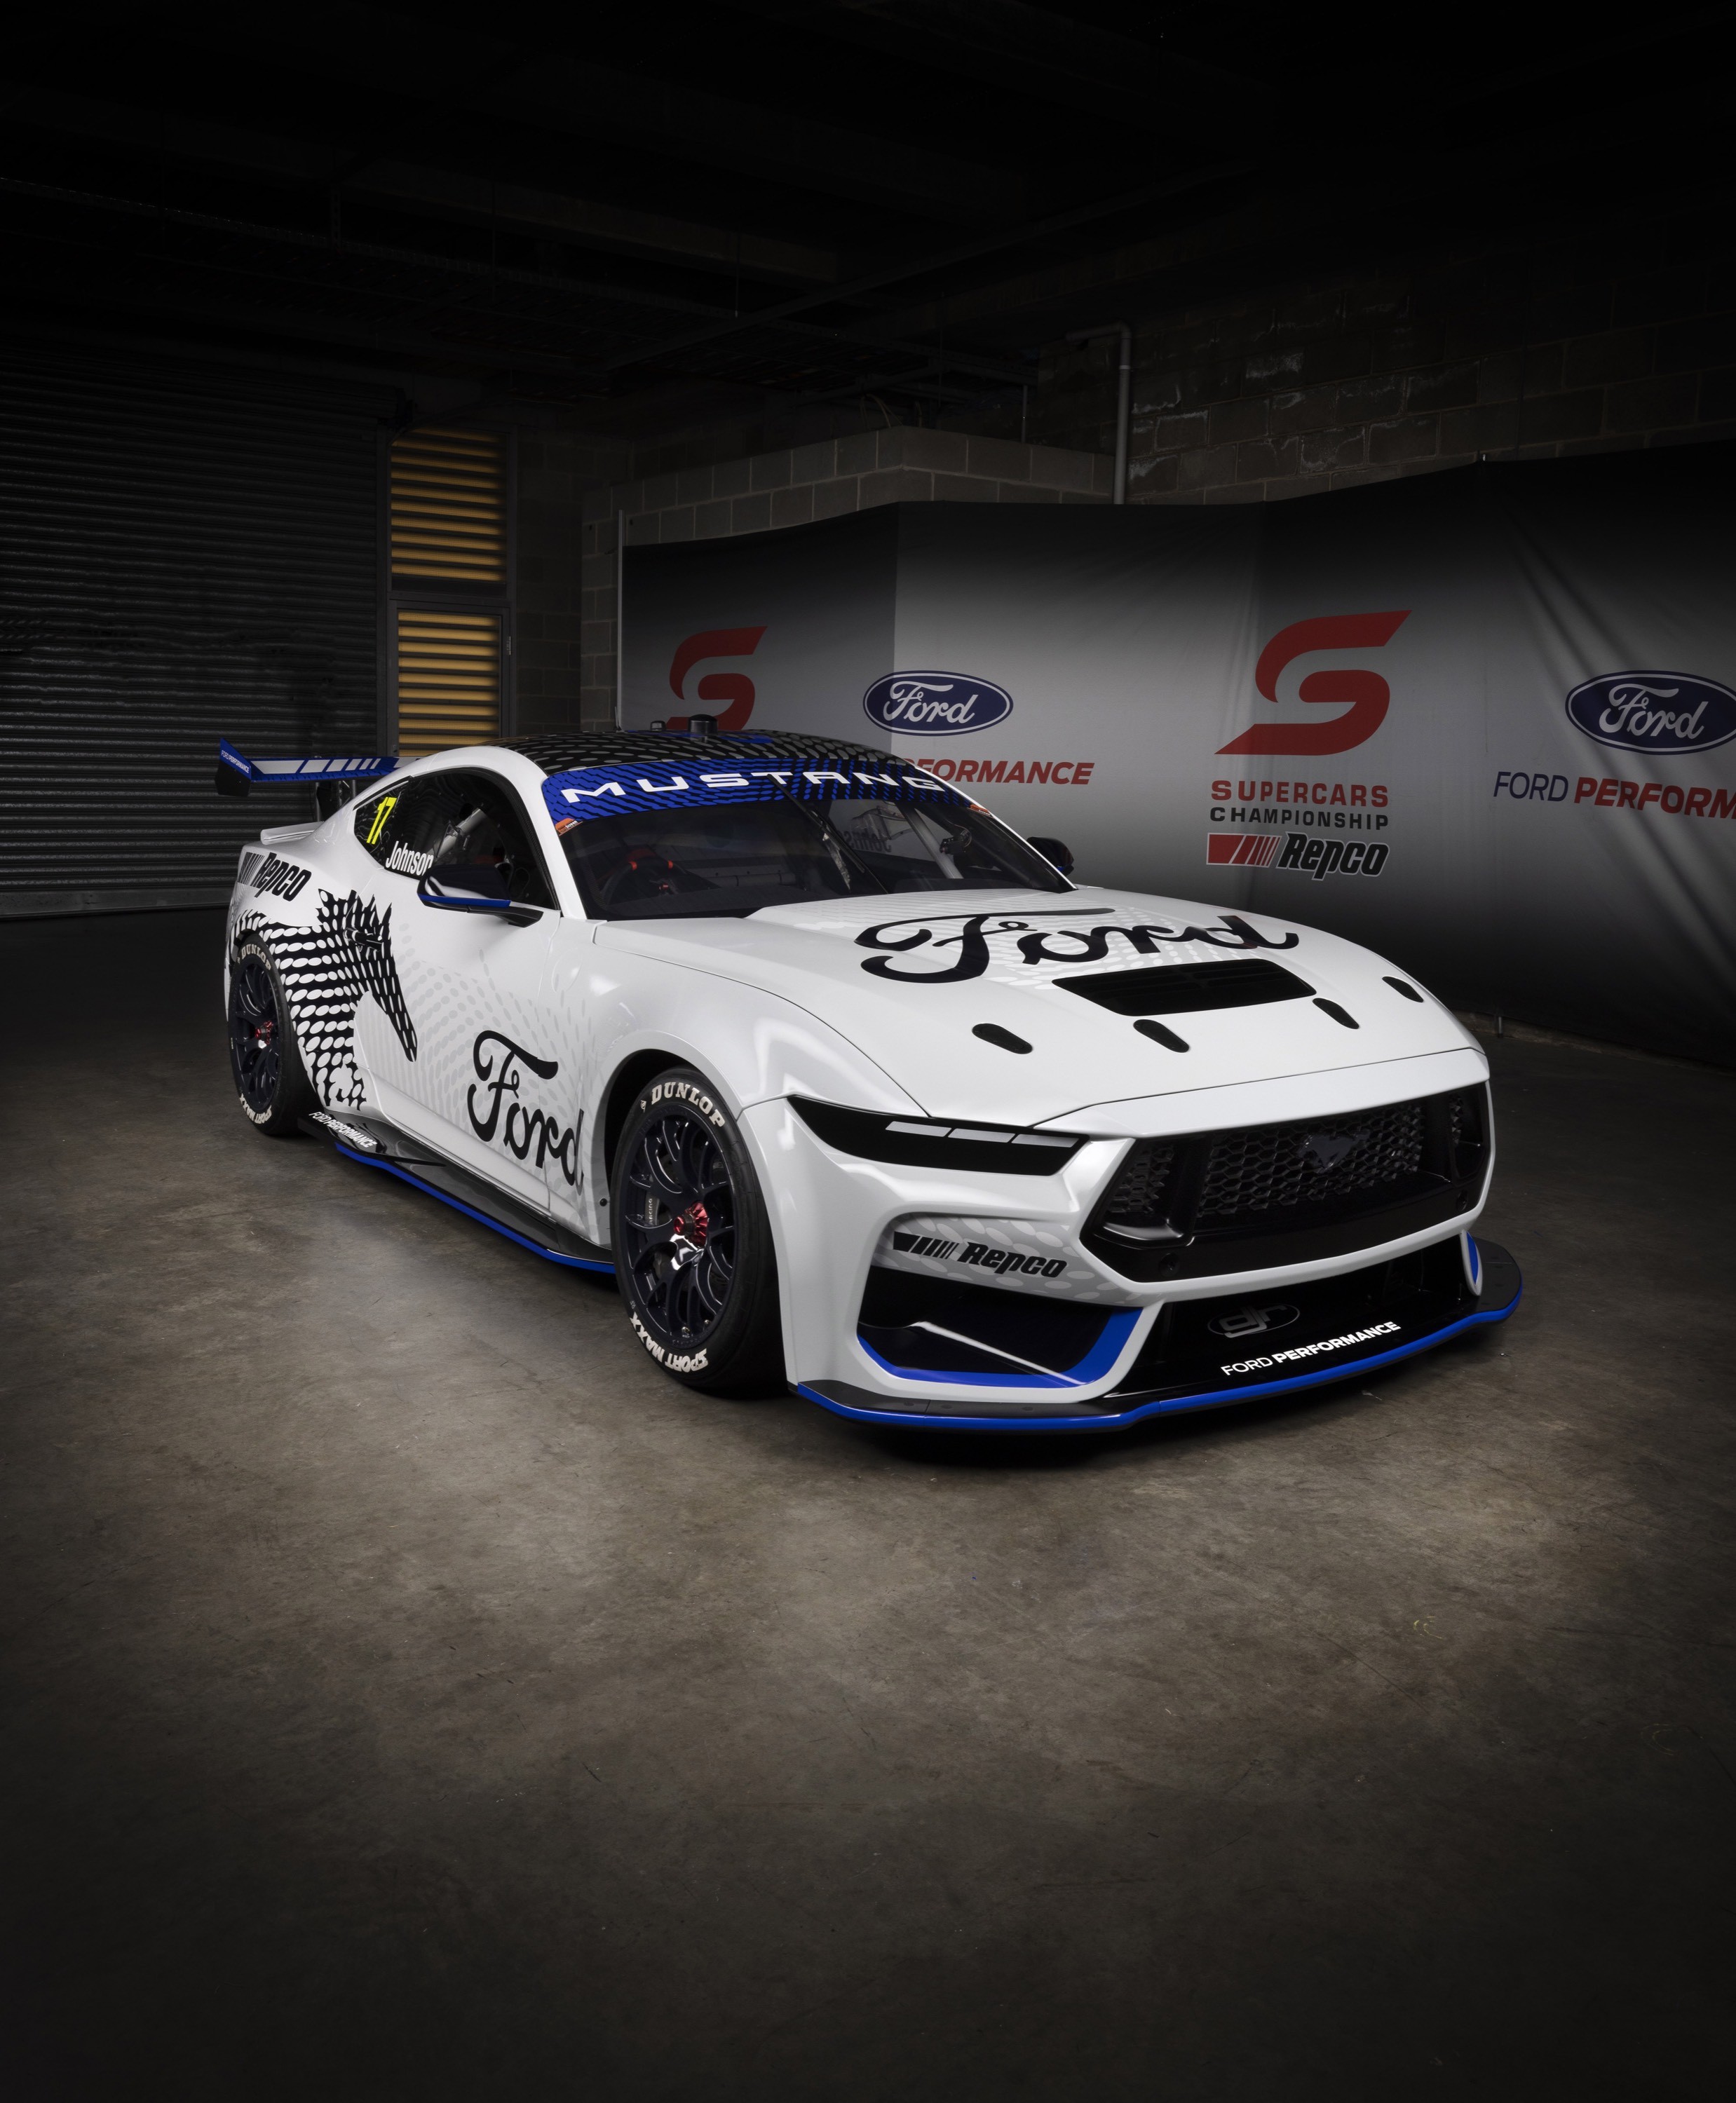 Ford Mustang GT Gen3 Supercar (2023) - pictures & information